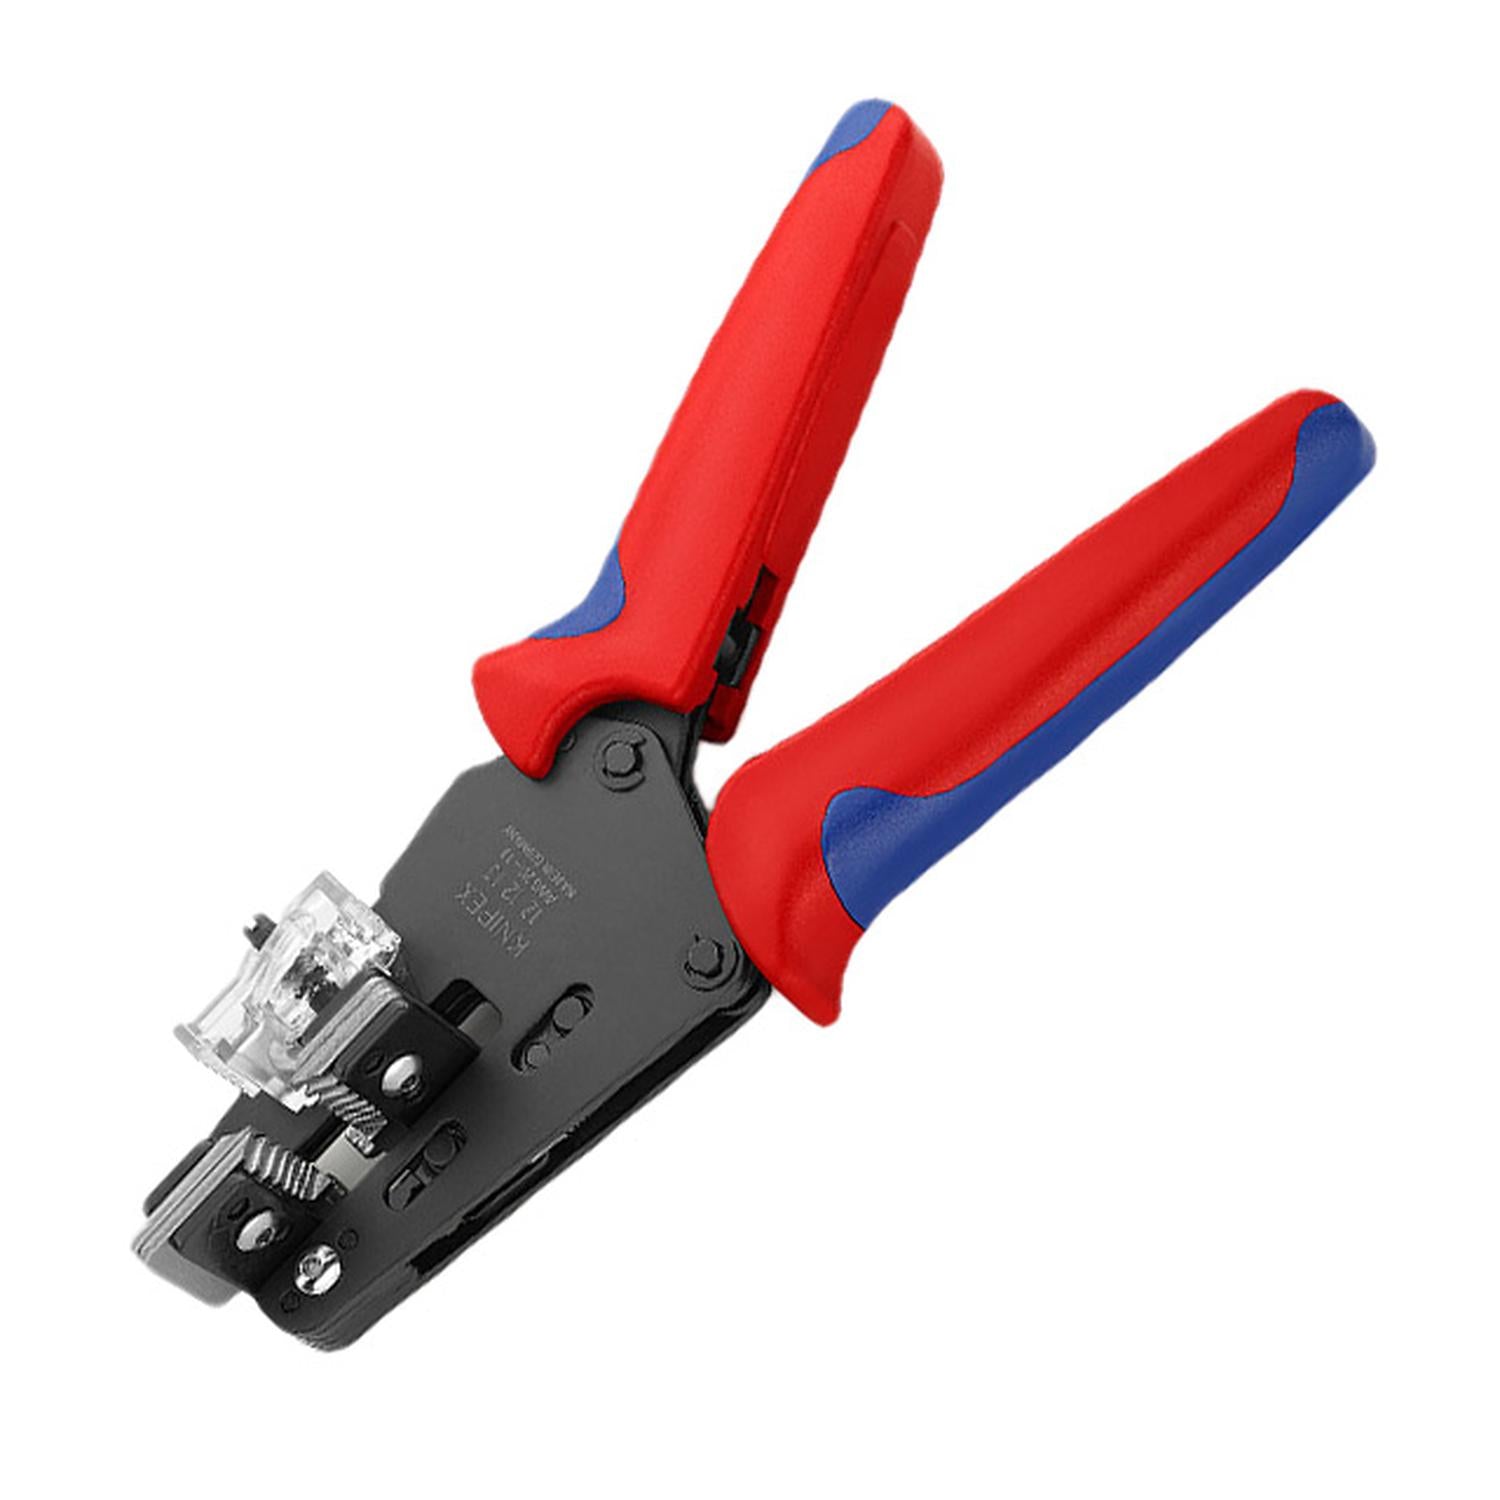 KNIPEX 12 12 13 Pinzas pelacables automaticas laterales